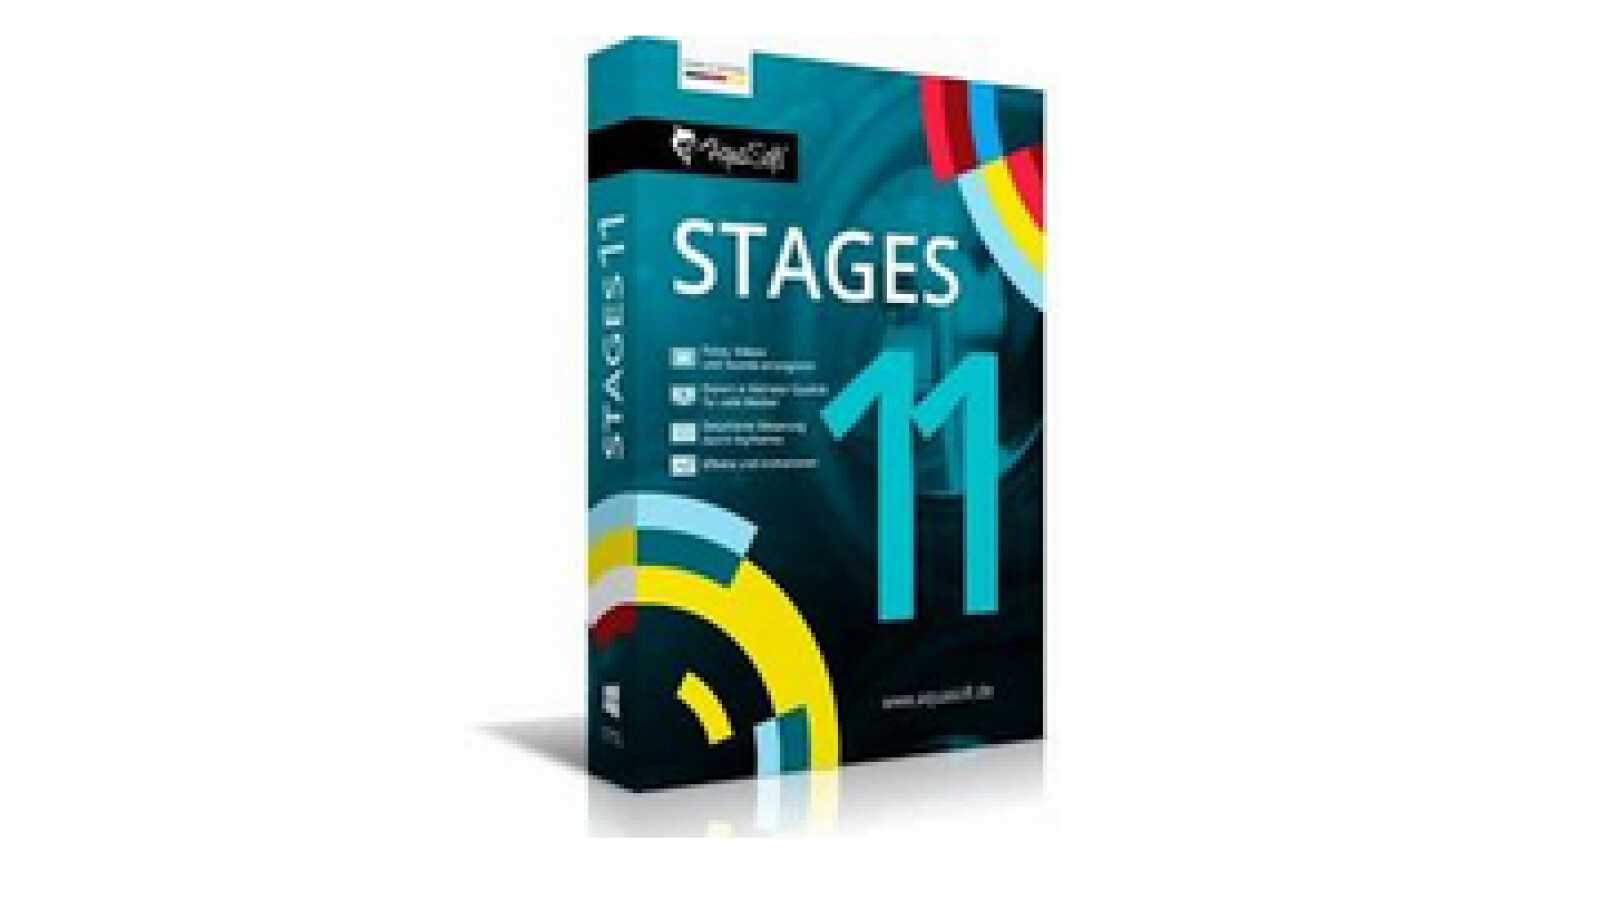 download the last version for ios AquaSoft Stages 14.2.11